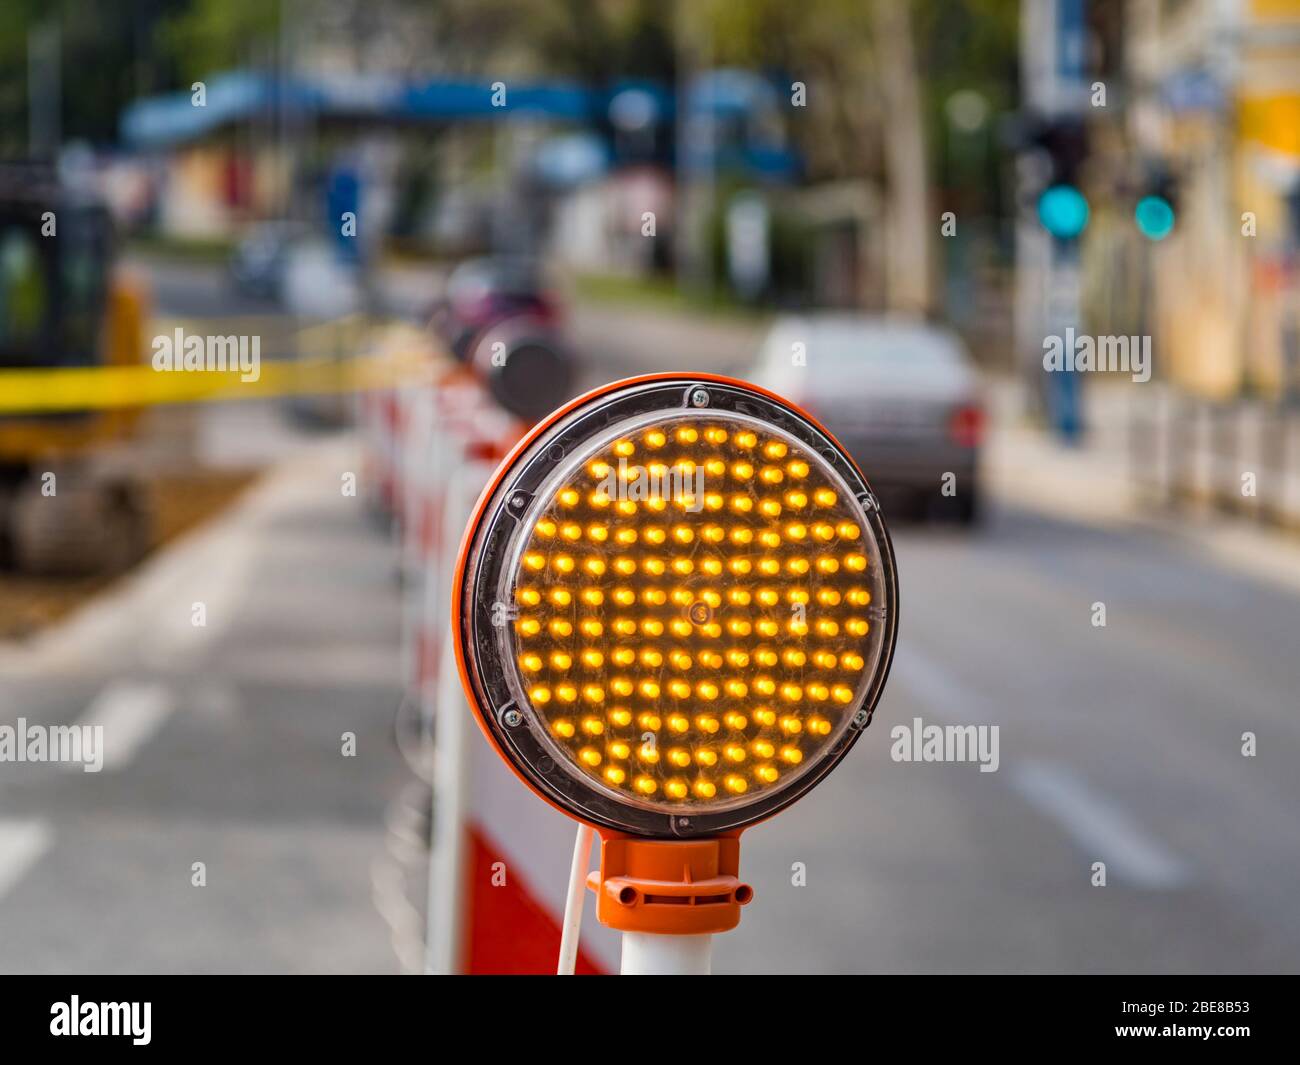 Road multiple Yellow LED lamps circular signal slow traffic warning sign work in progrss passing by car vehicle Stock Photo